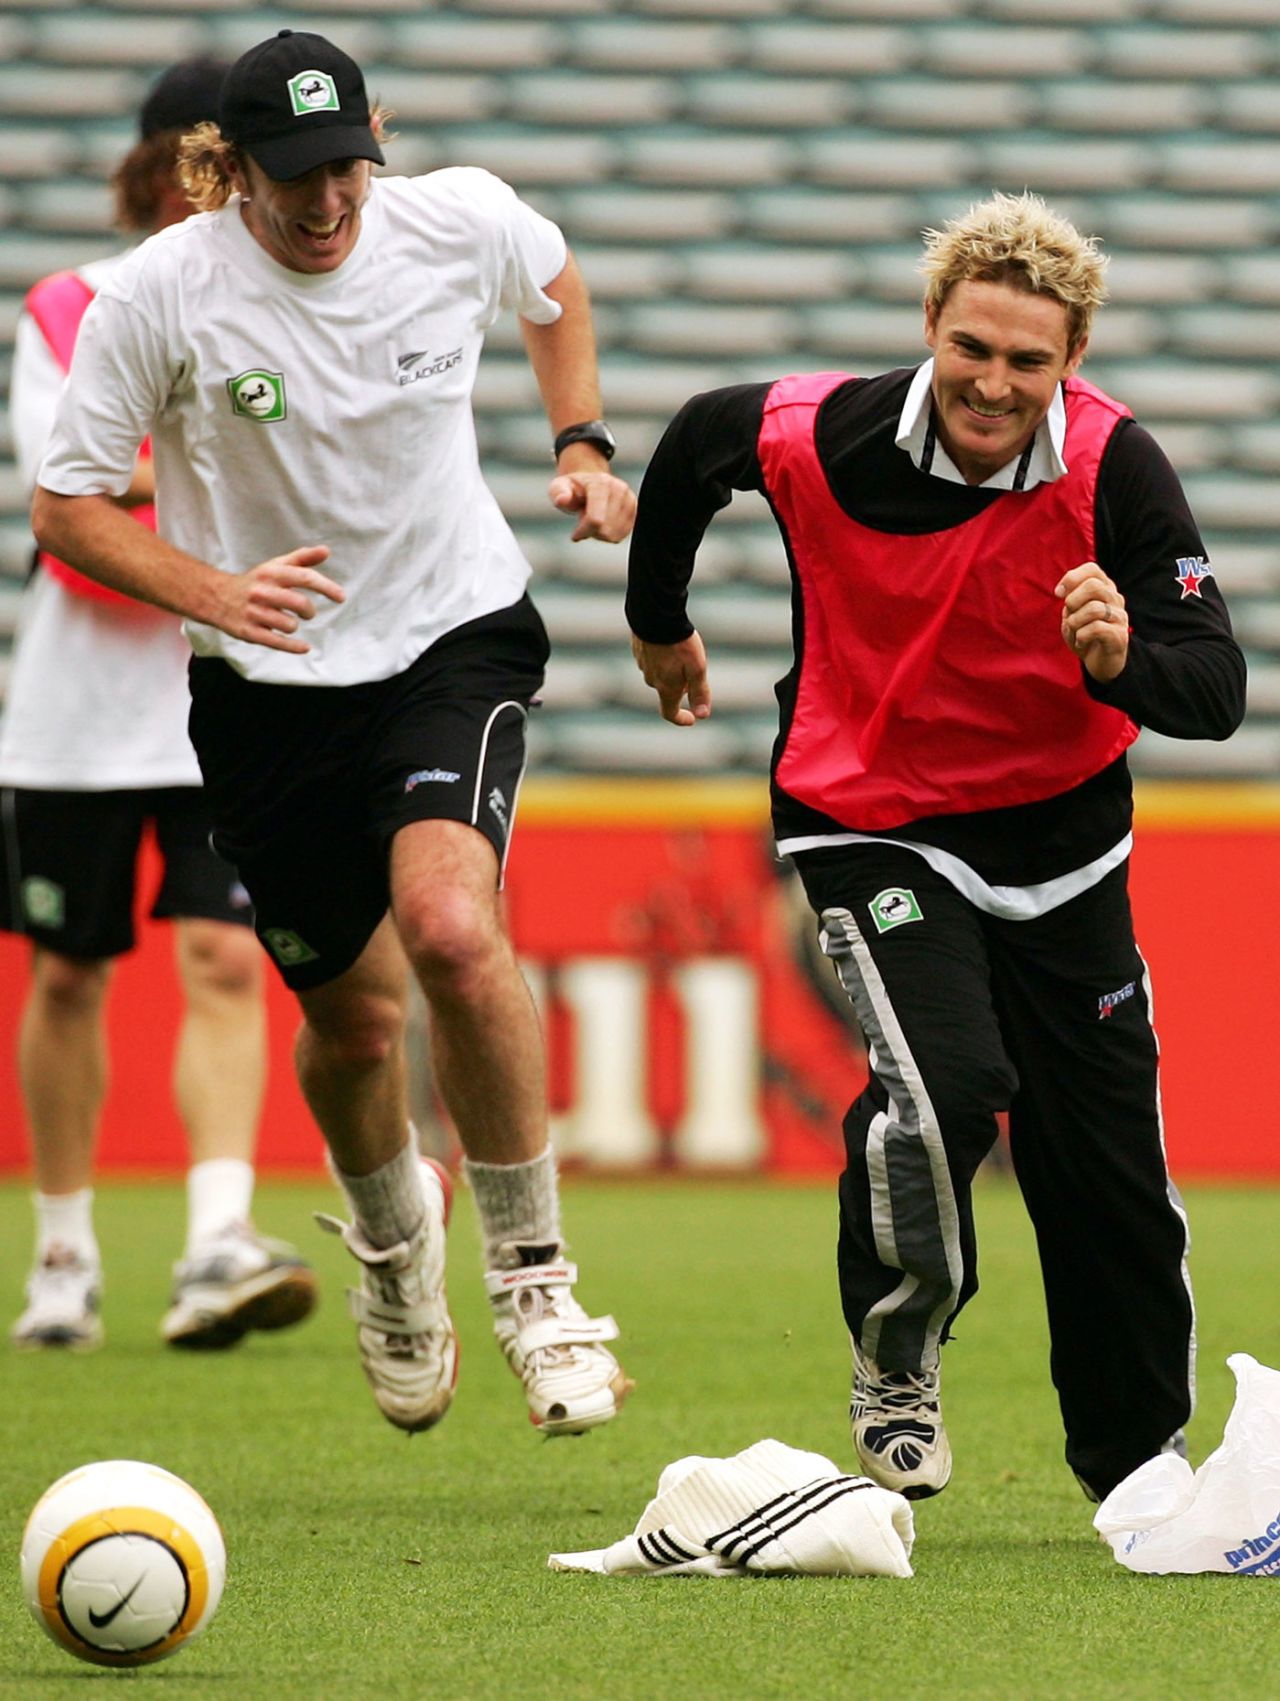 Iain O'Brien and Brendon McCullum play football during practice, Auckland, March 24, 2005